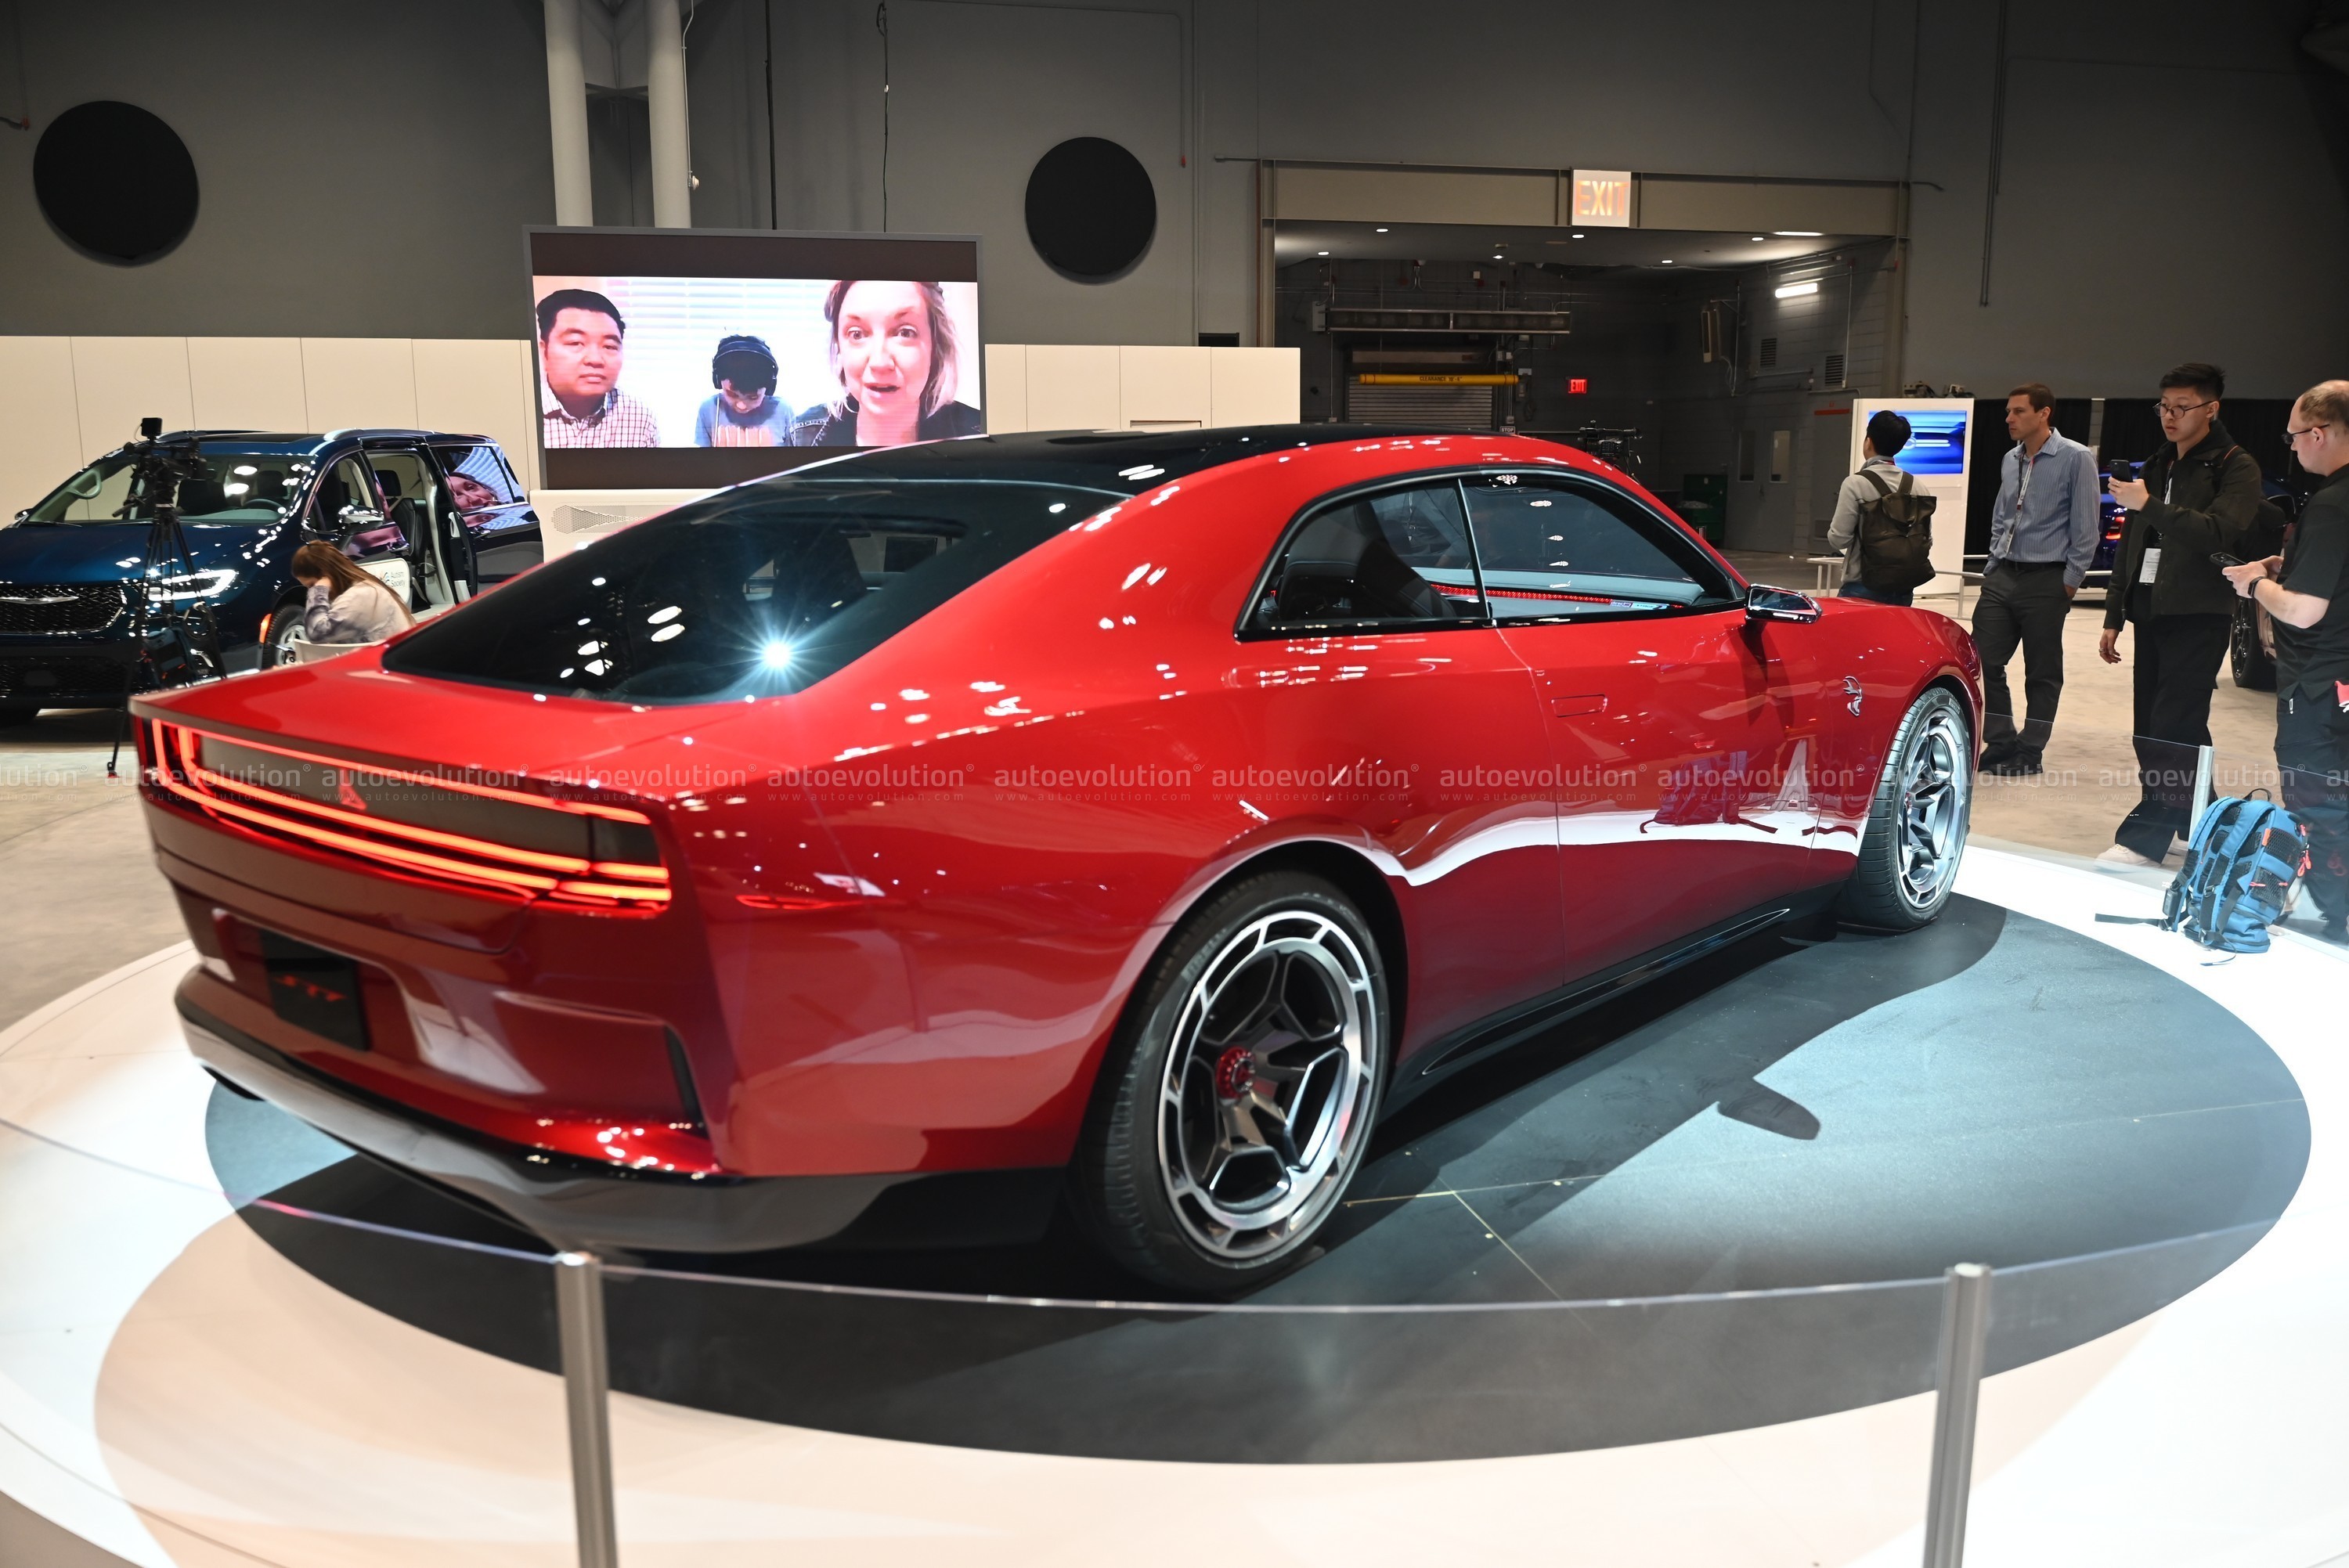 https://s1.cdn.autoevolution.com/images/news/gallery/dodge-charger-daytona-srt-the-important-muscle-car-in-50-years-shines-at-the-ny-auto-show_11.jpg